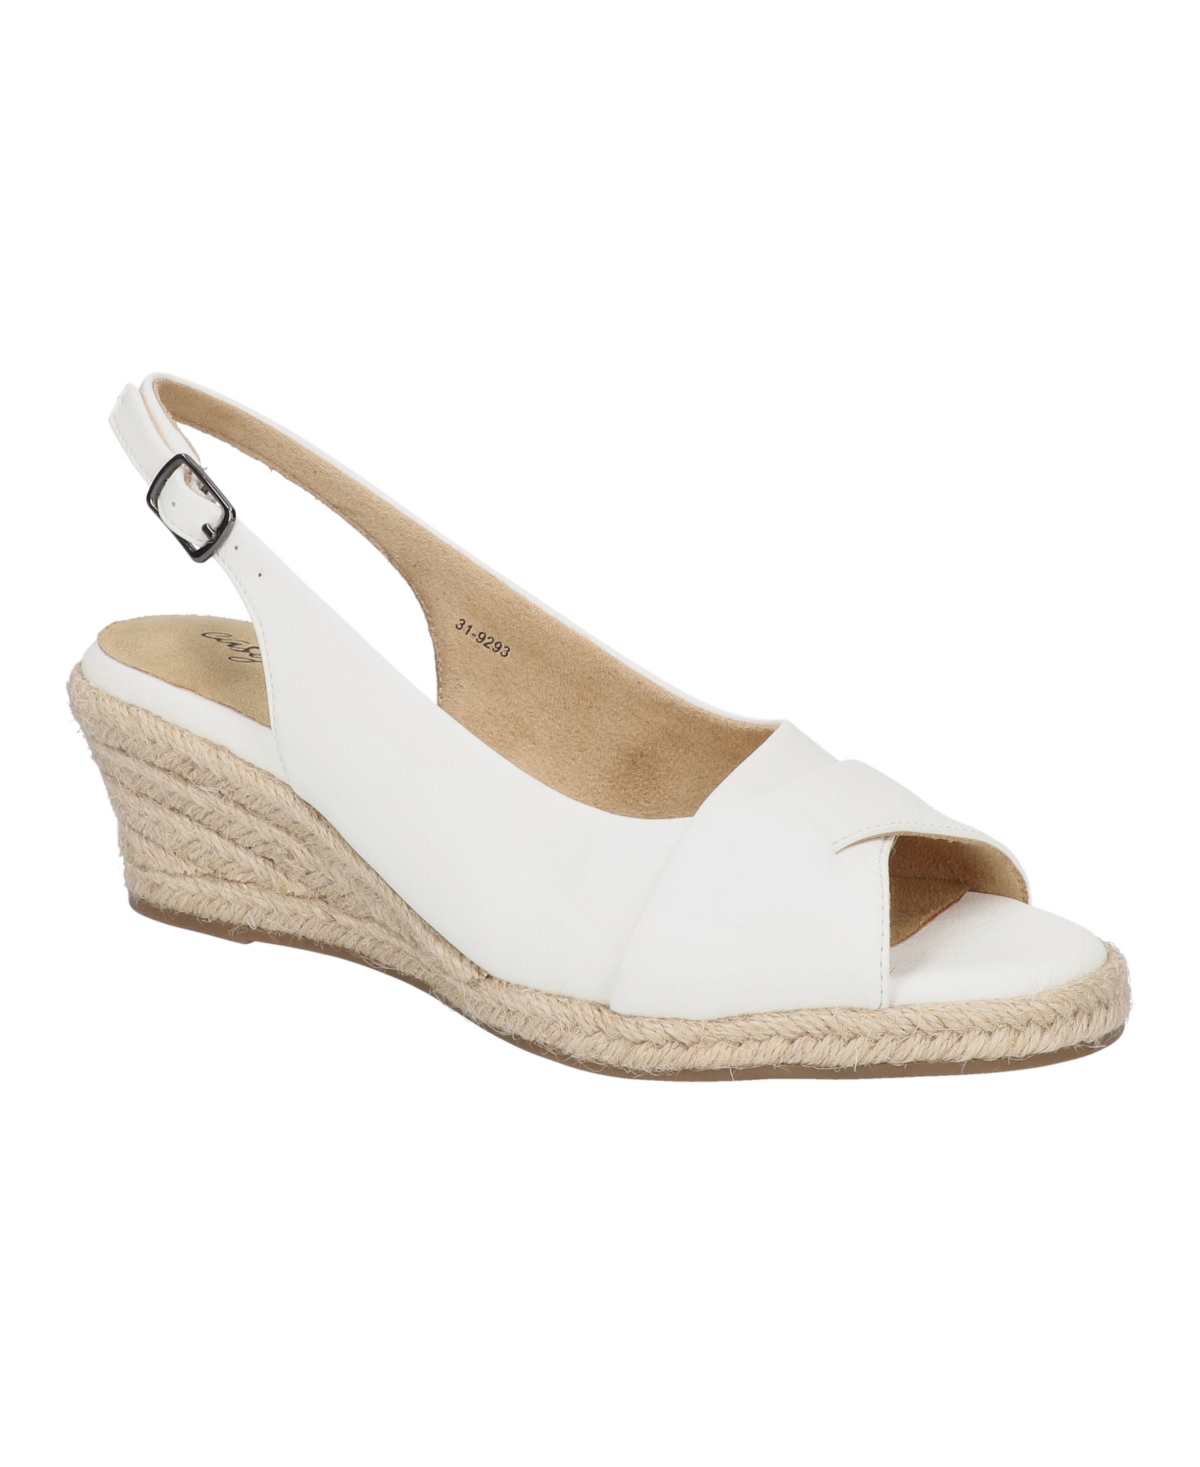 Easy Street Women's Devlin Espadrille Wedge Sandals In White - Manmade - Faux Leather